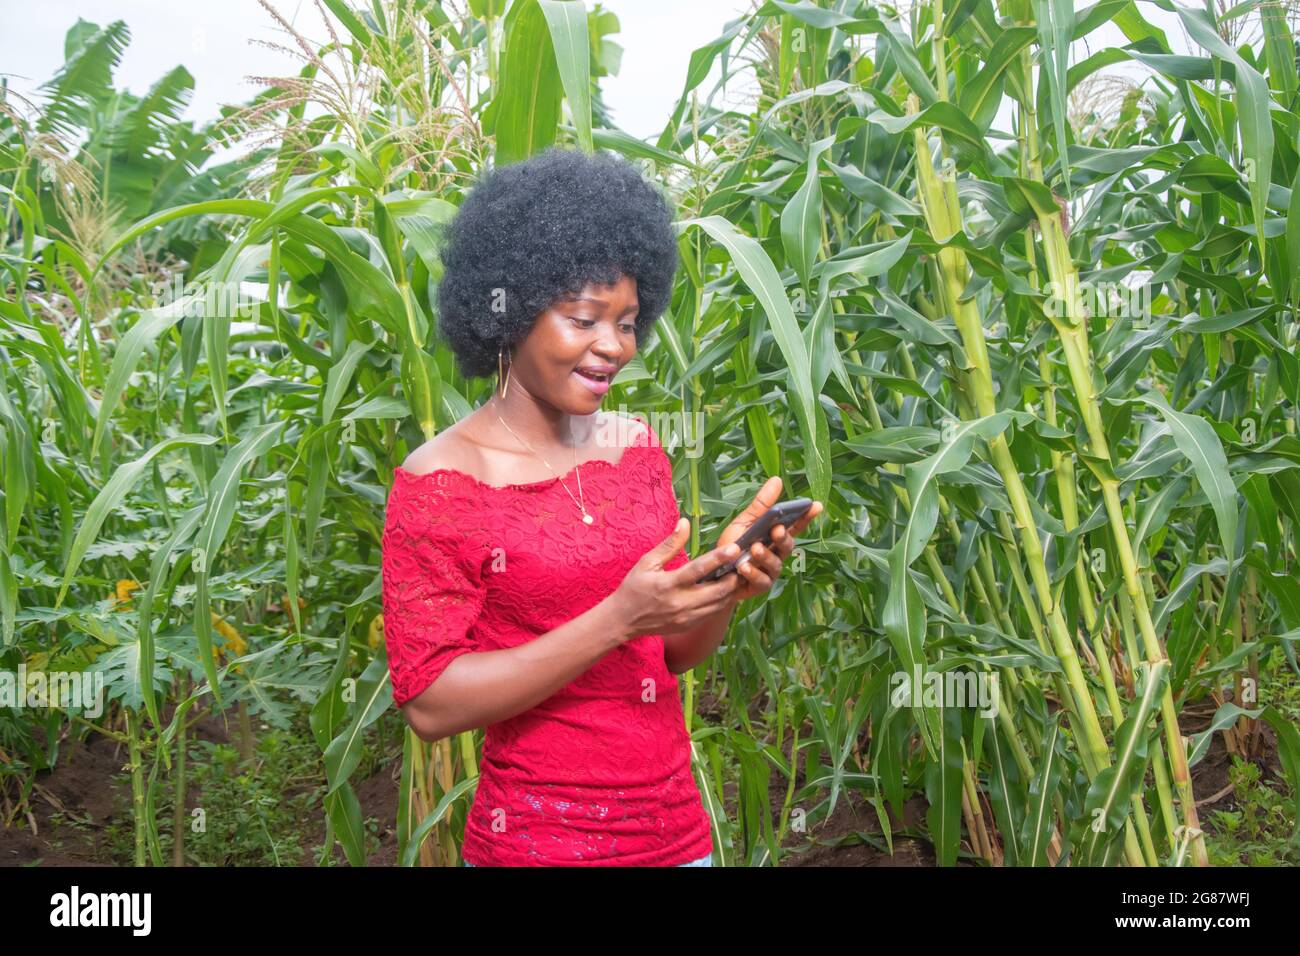 A cute African lady wearing a red dress and afro hair style, happily looking at the camera and holding a handset smartphone with both hands, on farm Stock Photo